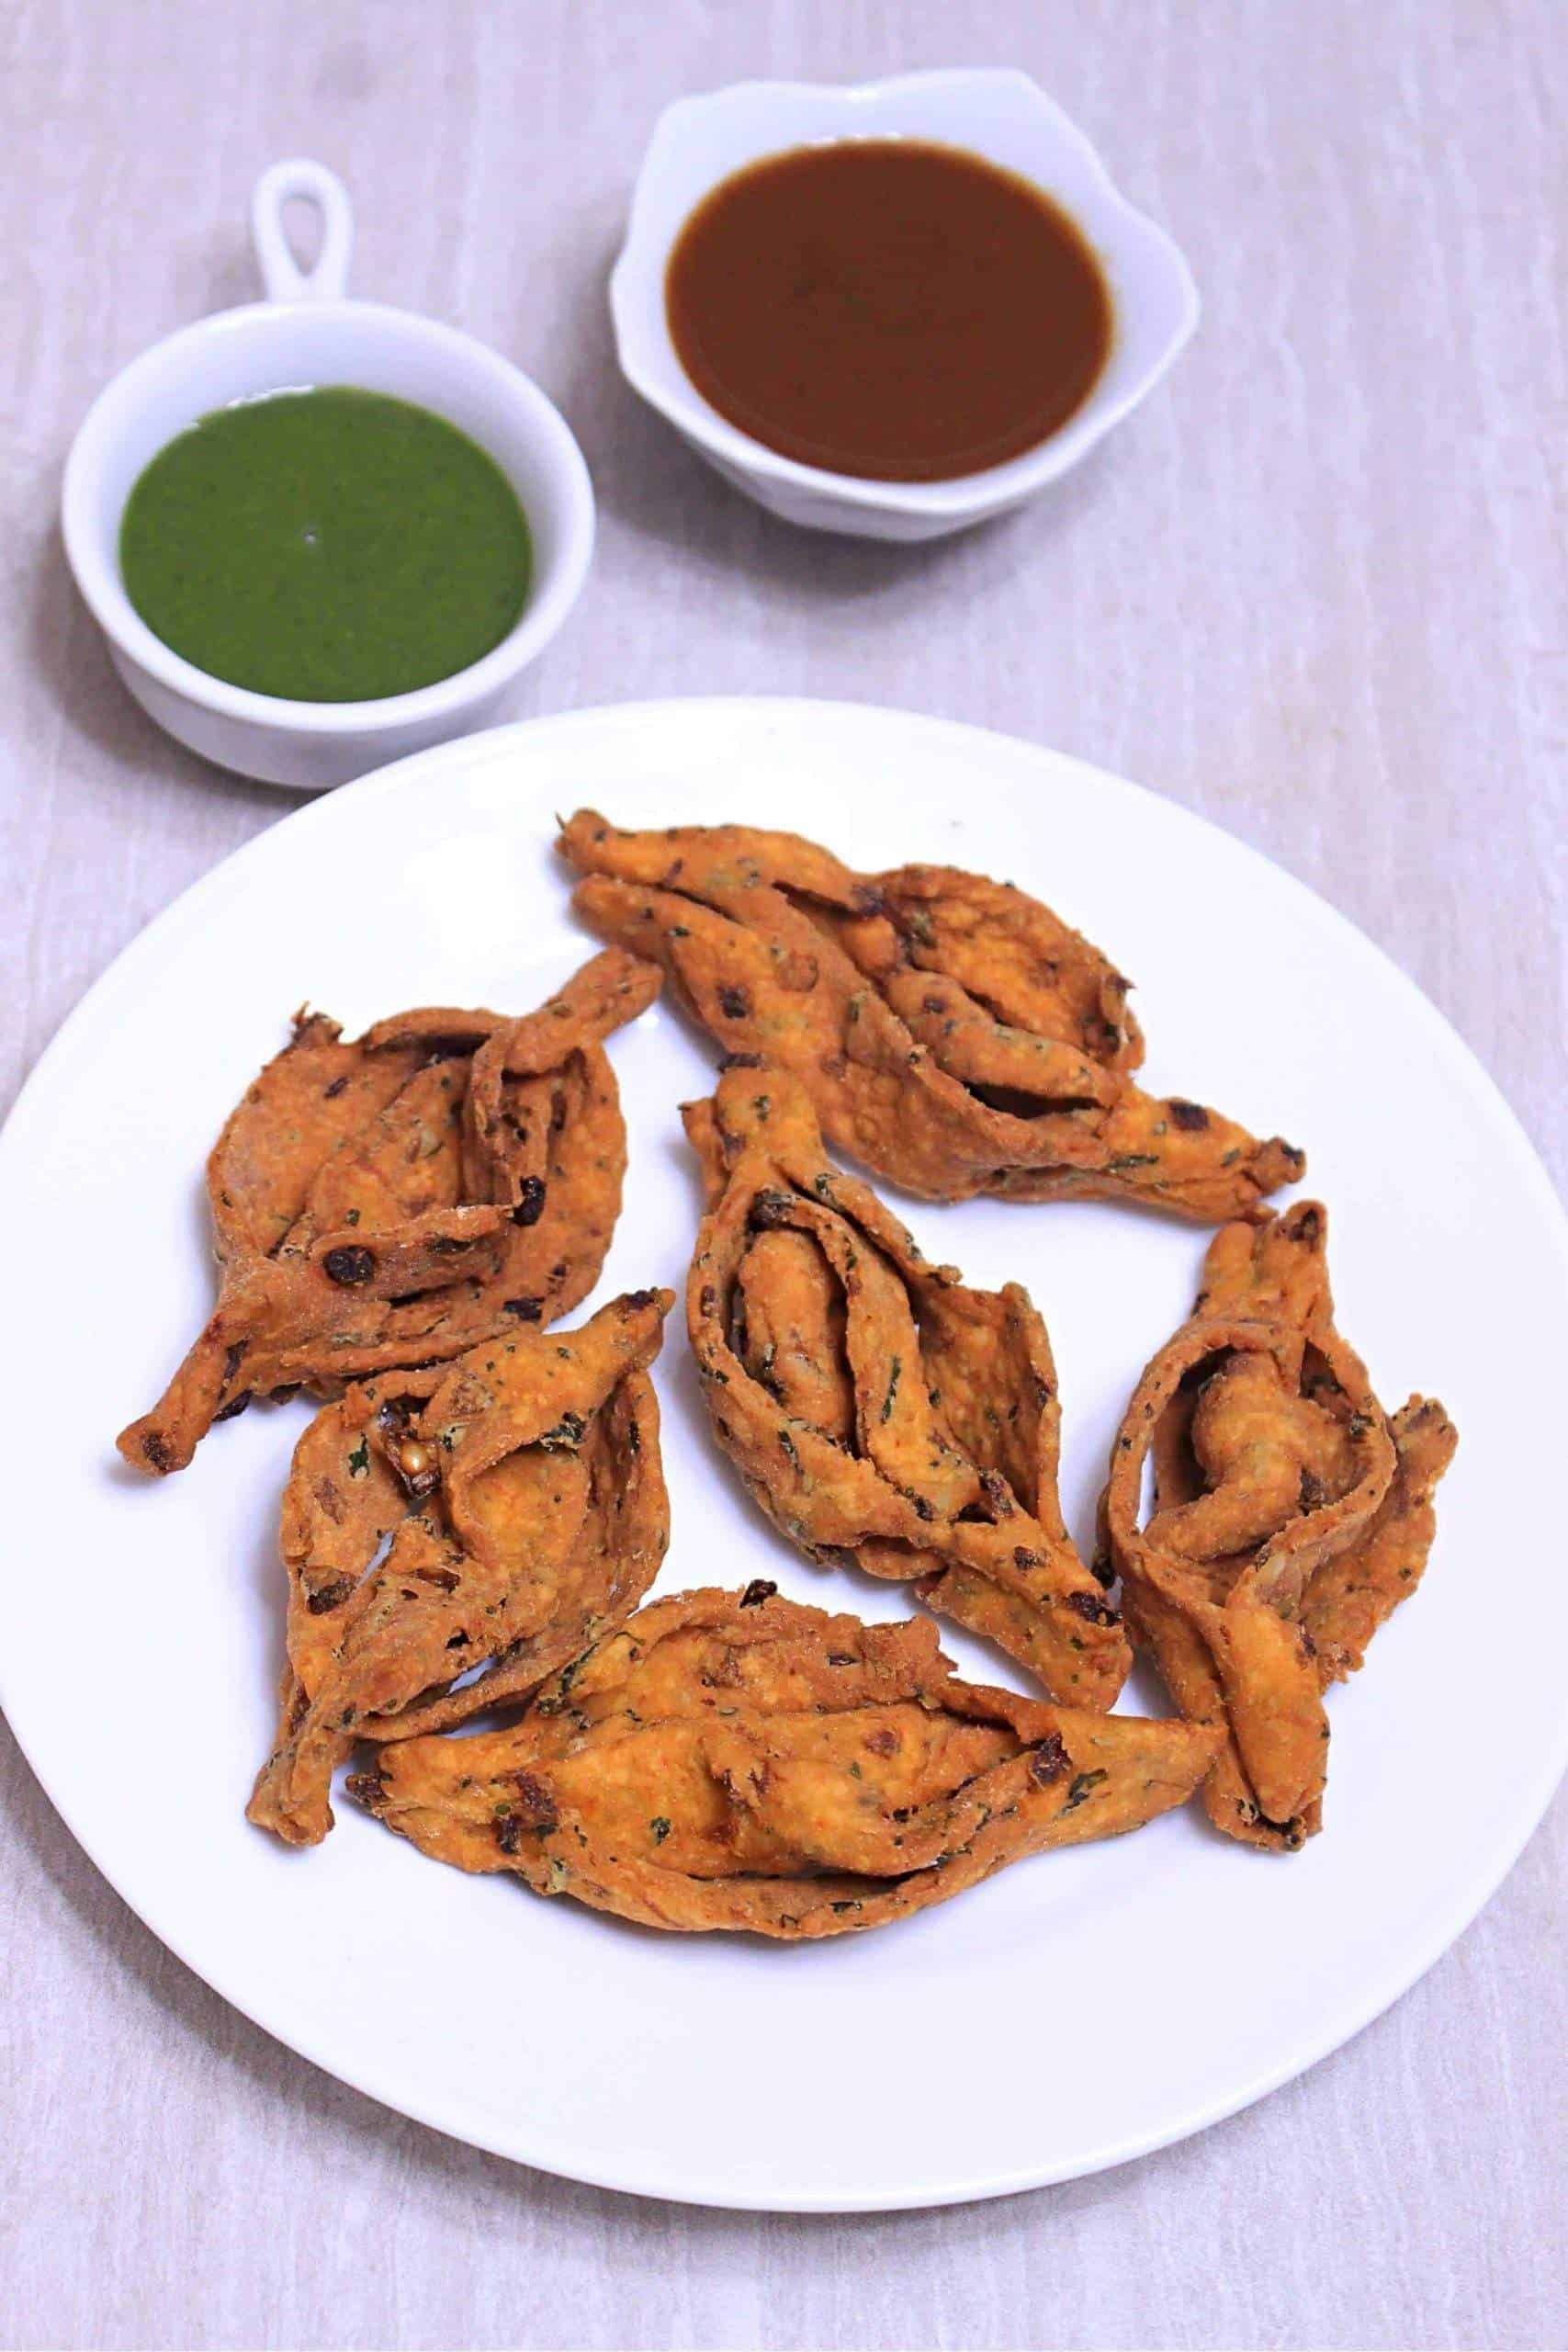 Assamese Star Fruit Shaped Snack with dipping sauce